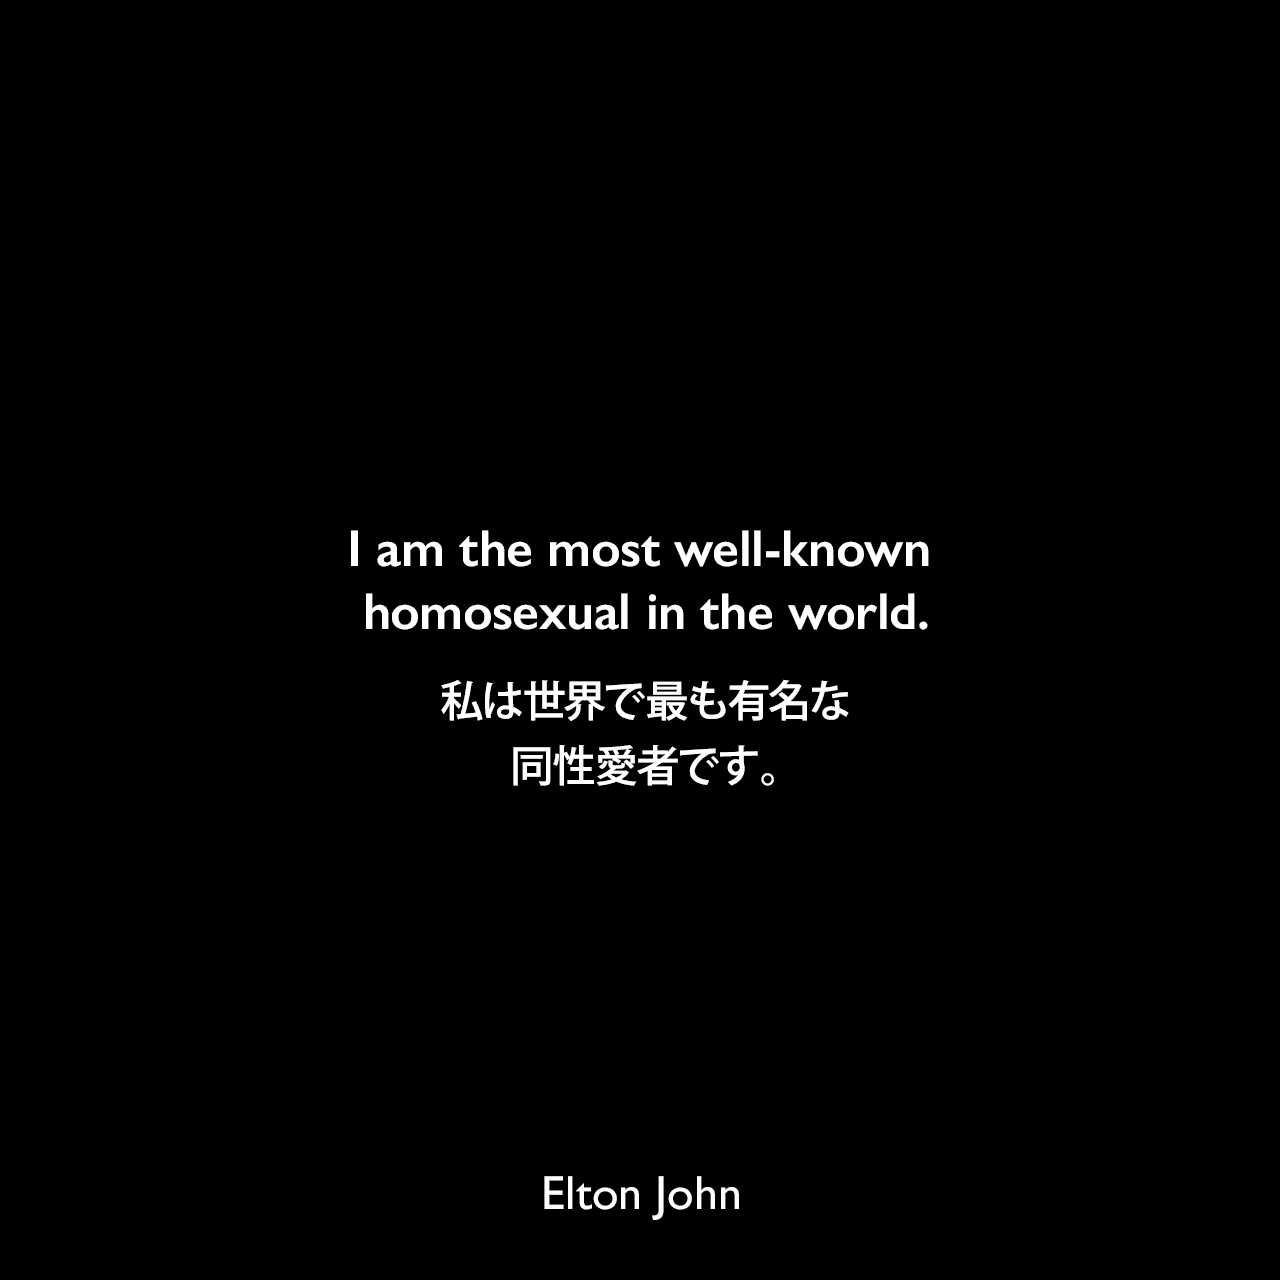 I am the most well-known homosexual in the world.私は世界で最も有名な同性愛者です。Elton John